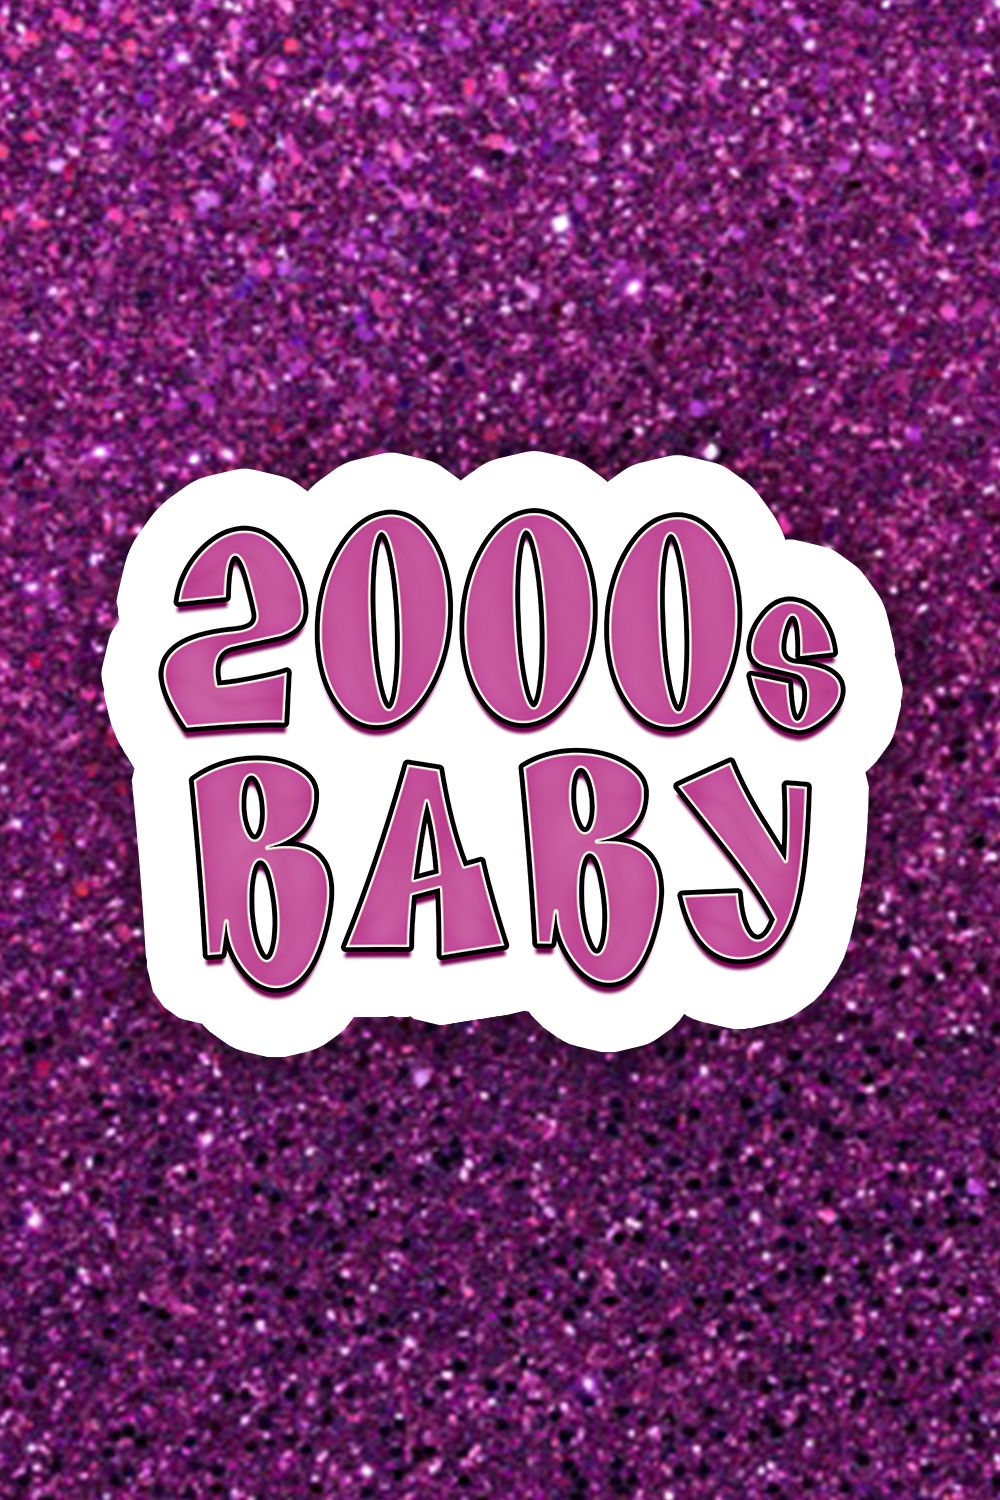 2000s Baby Sticker by RoserinArts baby, Purple aesthetic, Aesthetic iphone wallpaper